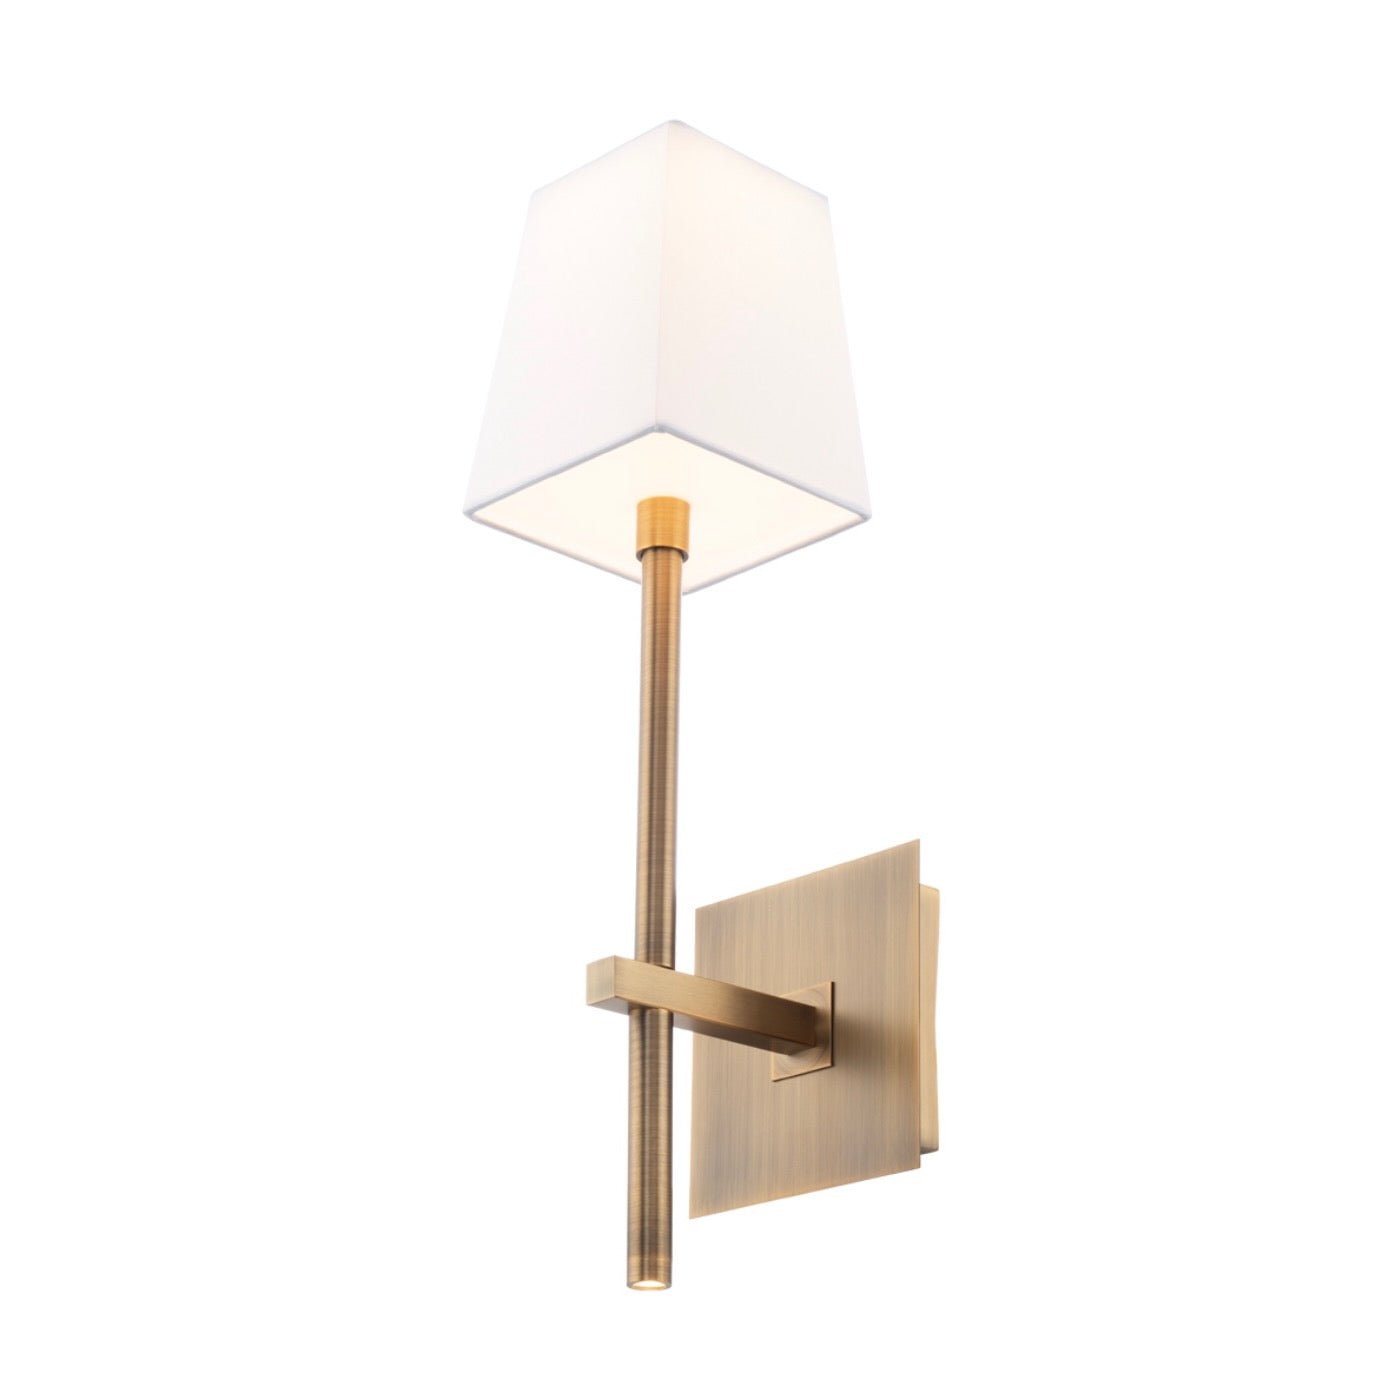 WAC Lighting | Seville Wall Sconce 3000K in Aged Brass